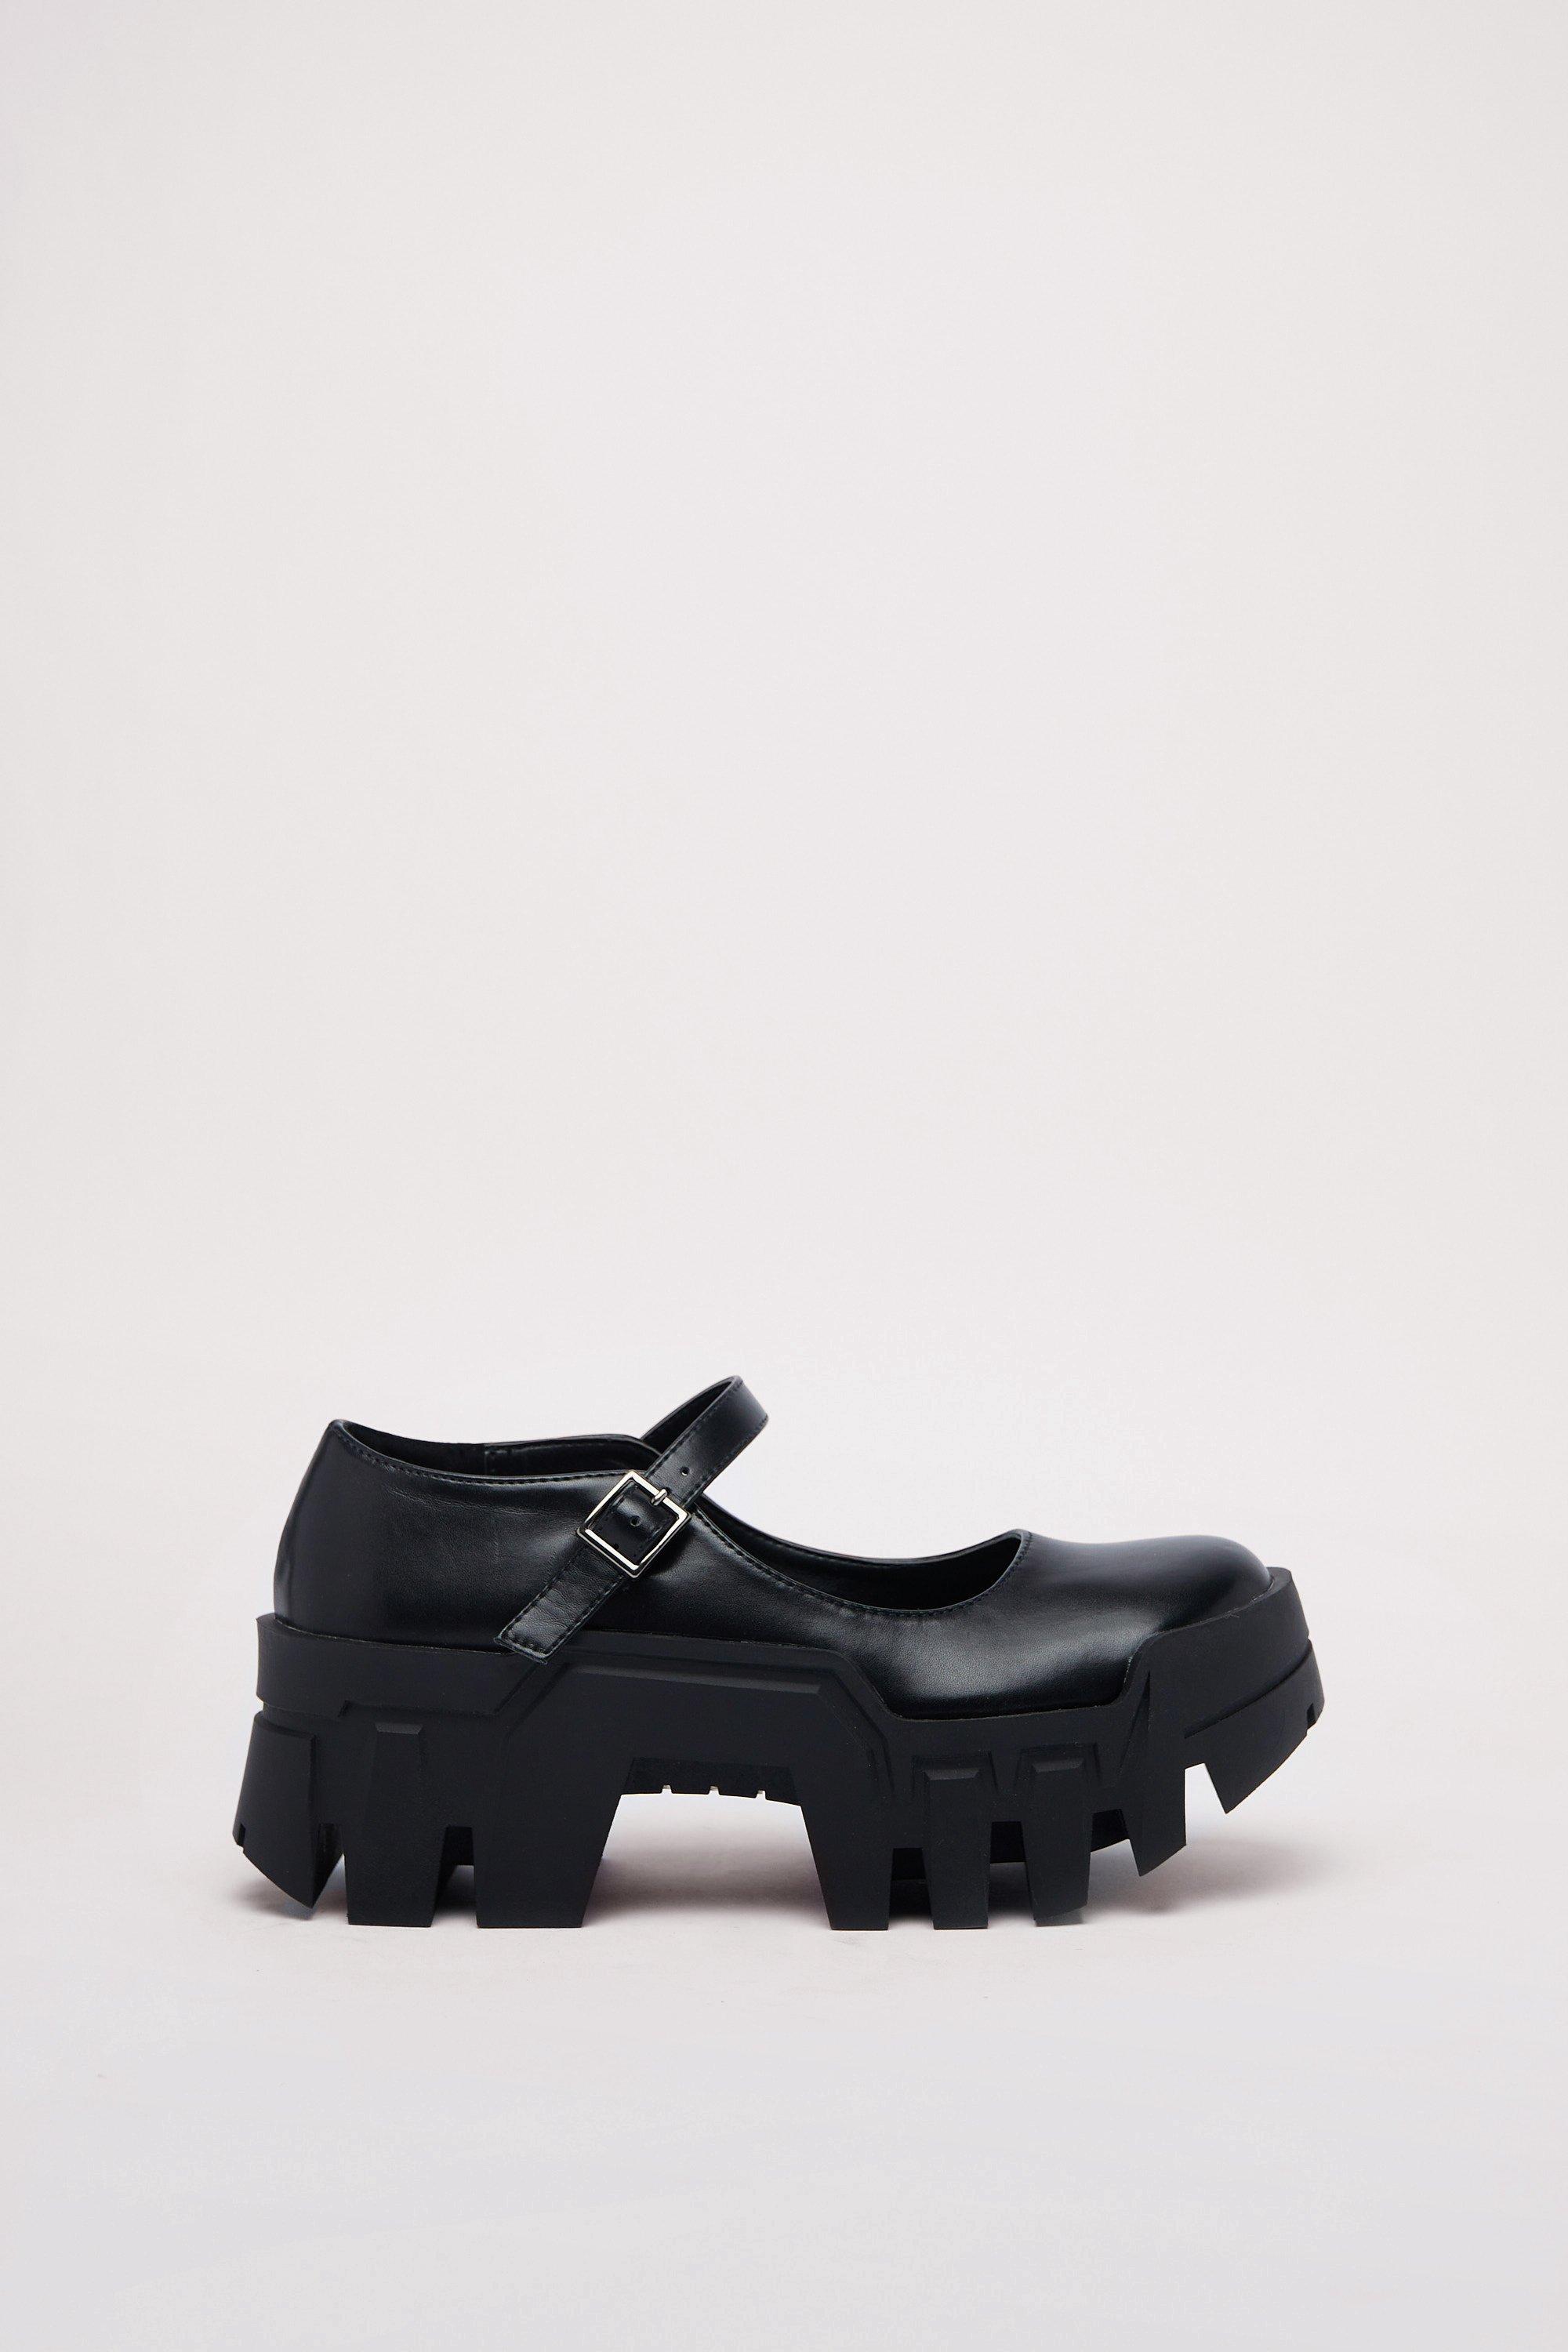 Black Mary Jane T Strap Cleated Sole Platforms High Chunky Heels